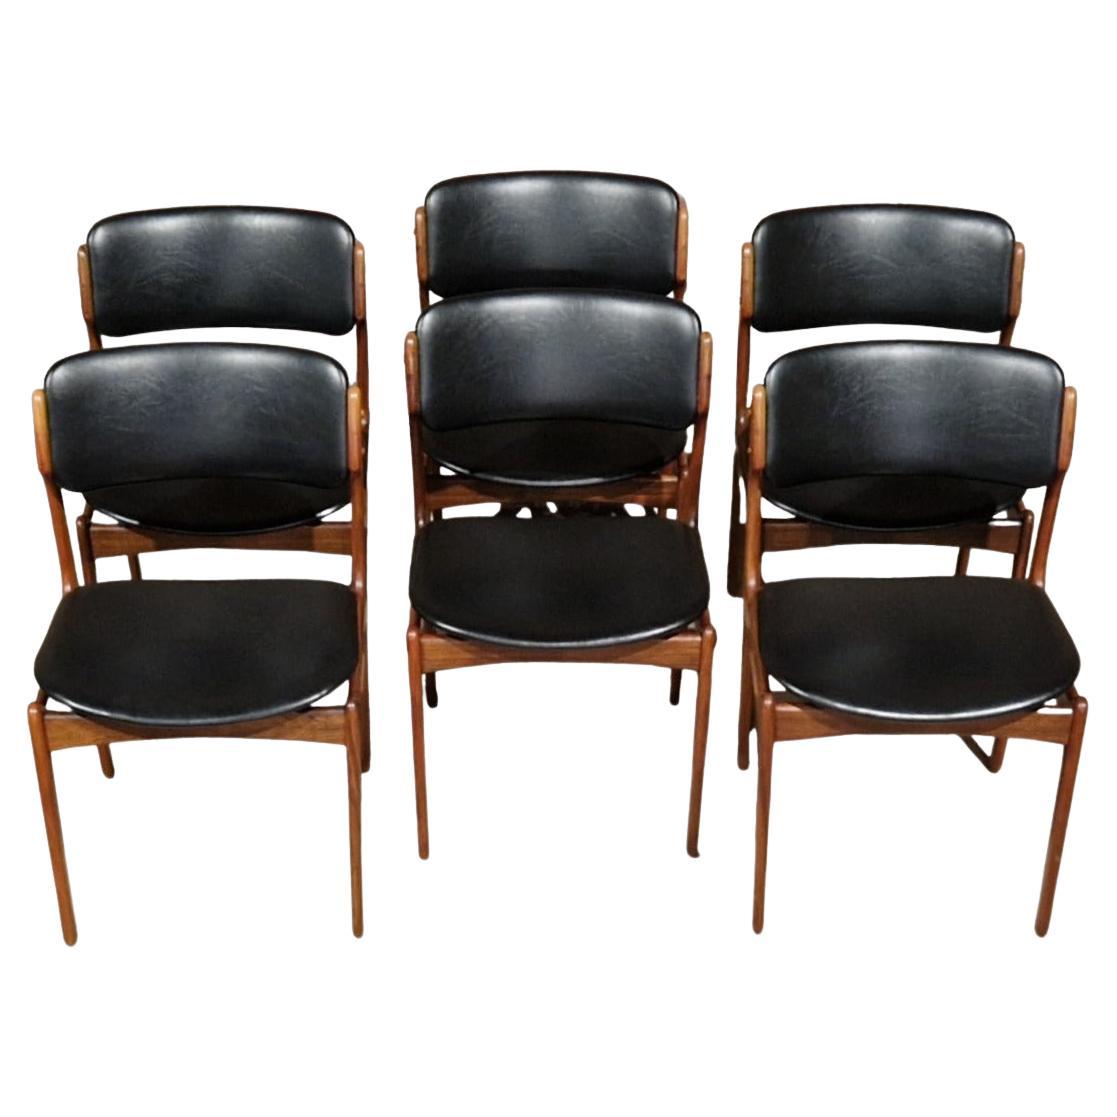 Danish chairs model 49 by Erik Buch for Oddense Maskinerei, 1960's, set of six For Sale